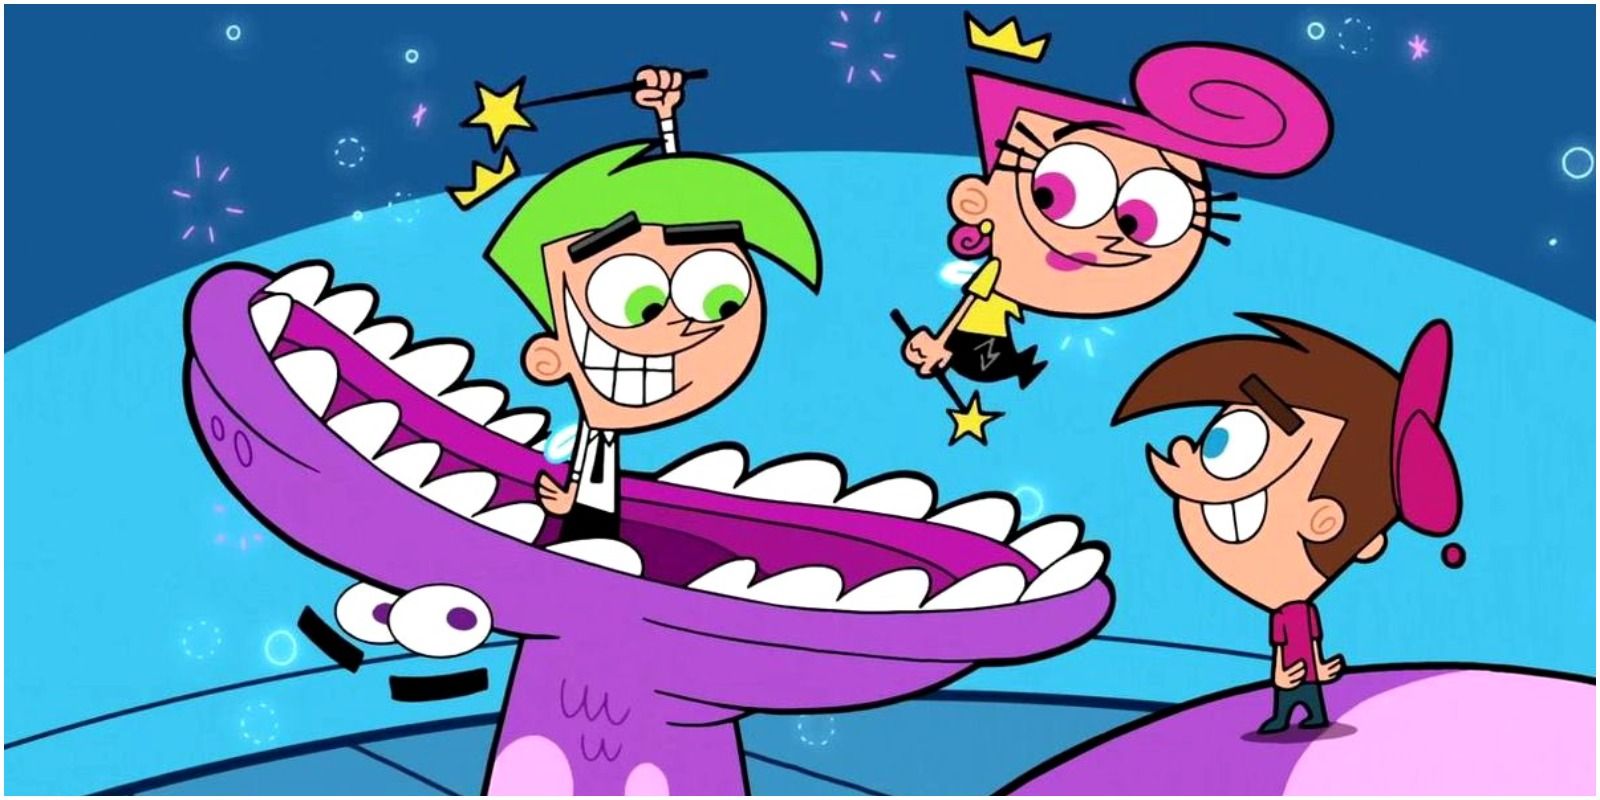 Timmy Turner Meeting His Fairly OddParents in the Opening Title Sequence